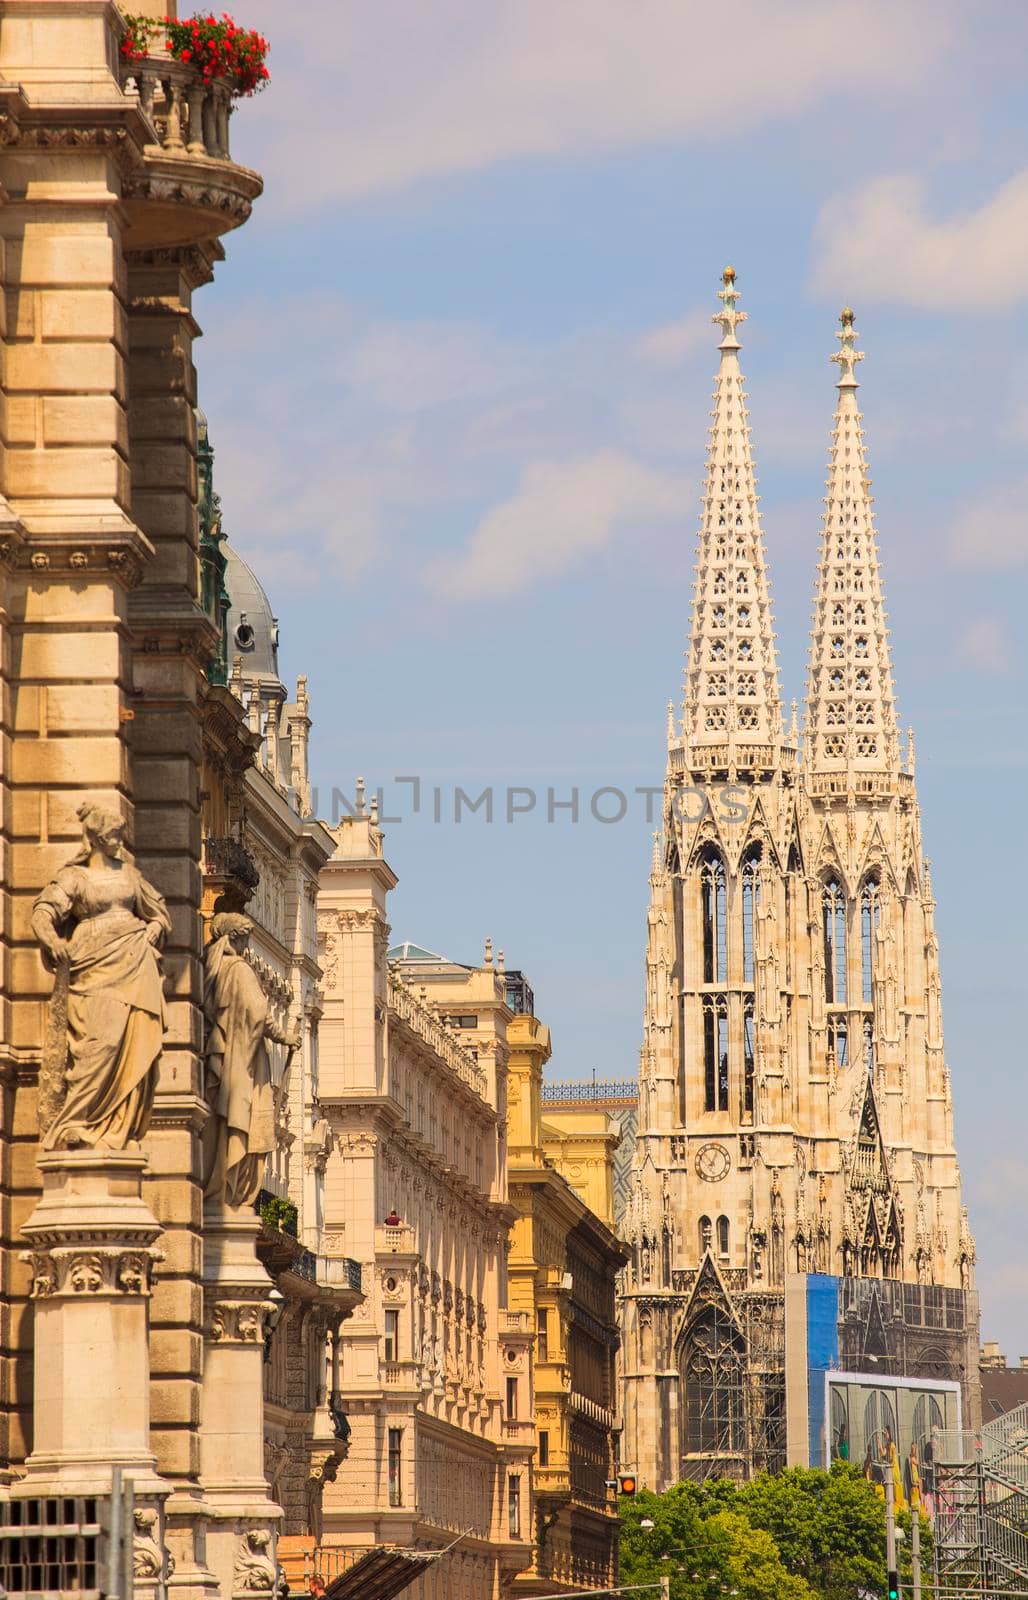 The Votivkirche in English "Votive Church" is a neo-Gothic church located on the Ringstrasse in Vienna